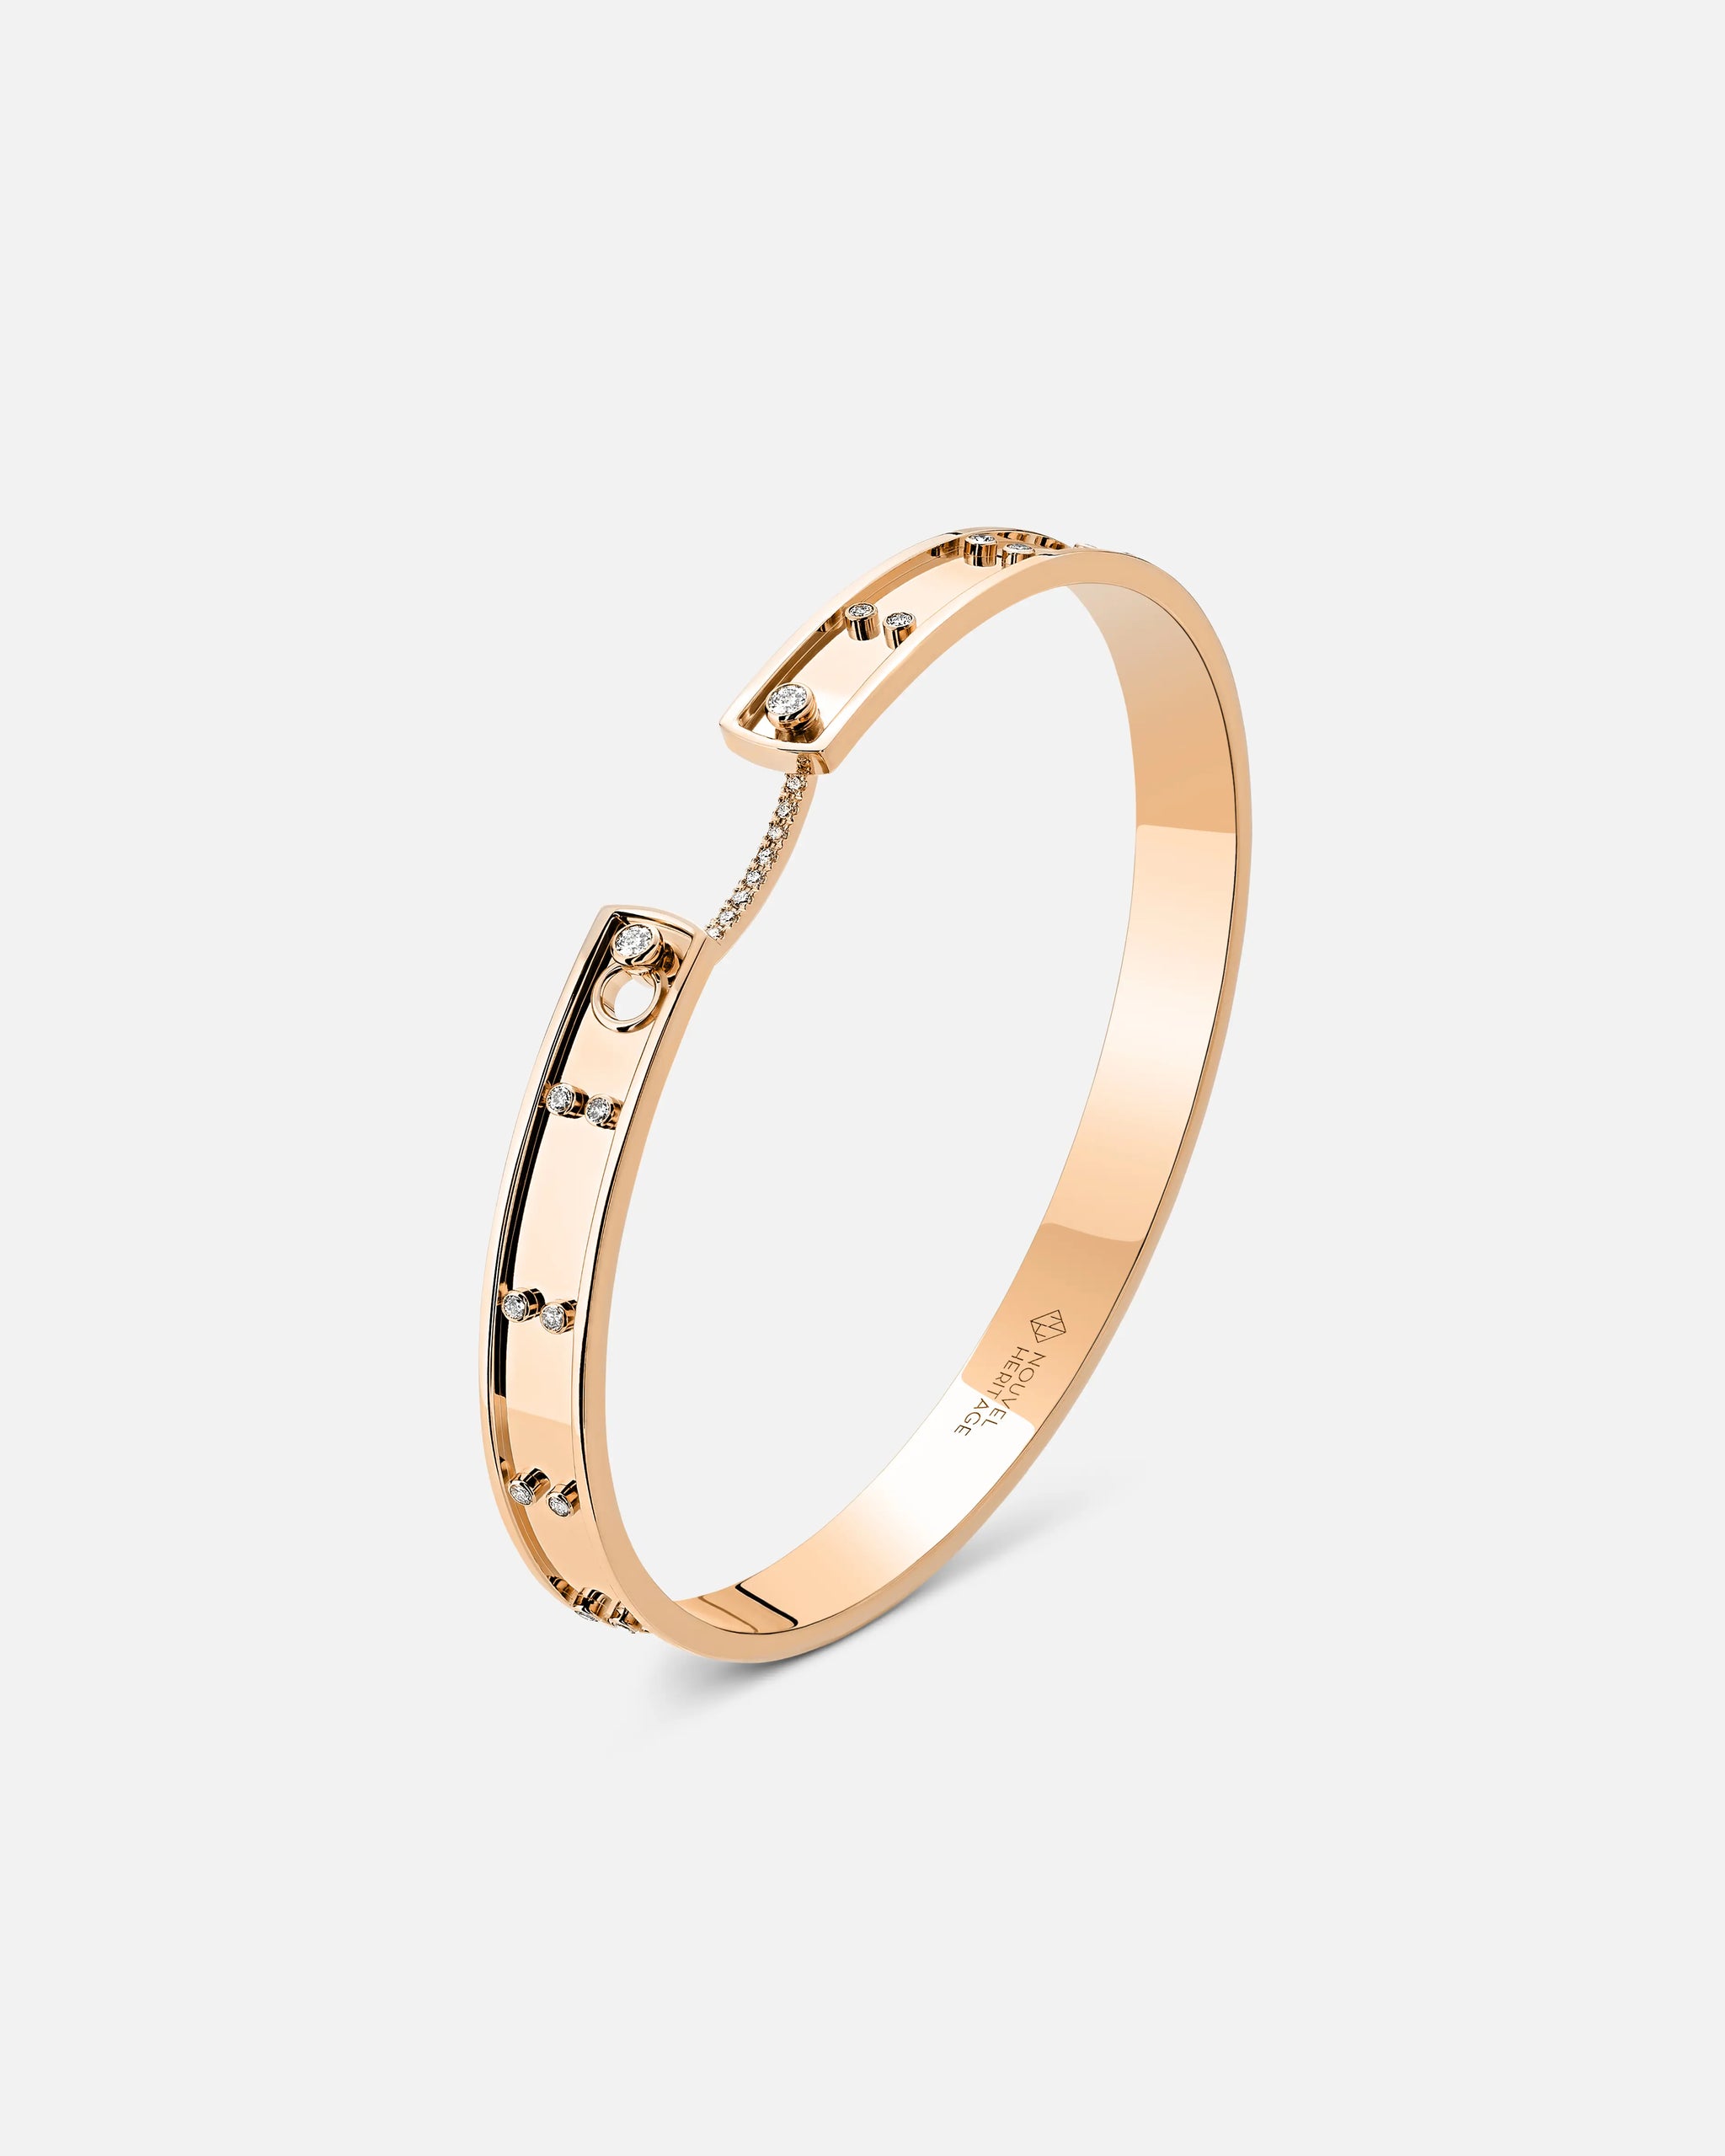 Picnic in Paris Mood Bangle in Rose Gold - 1 - Nouvel Heritage